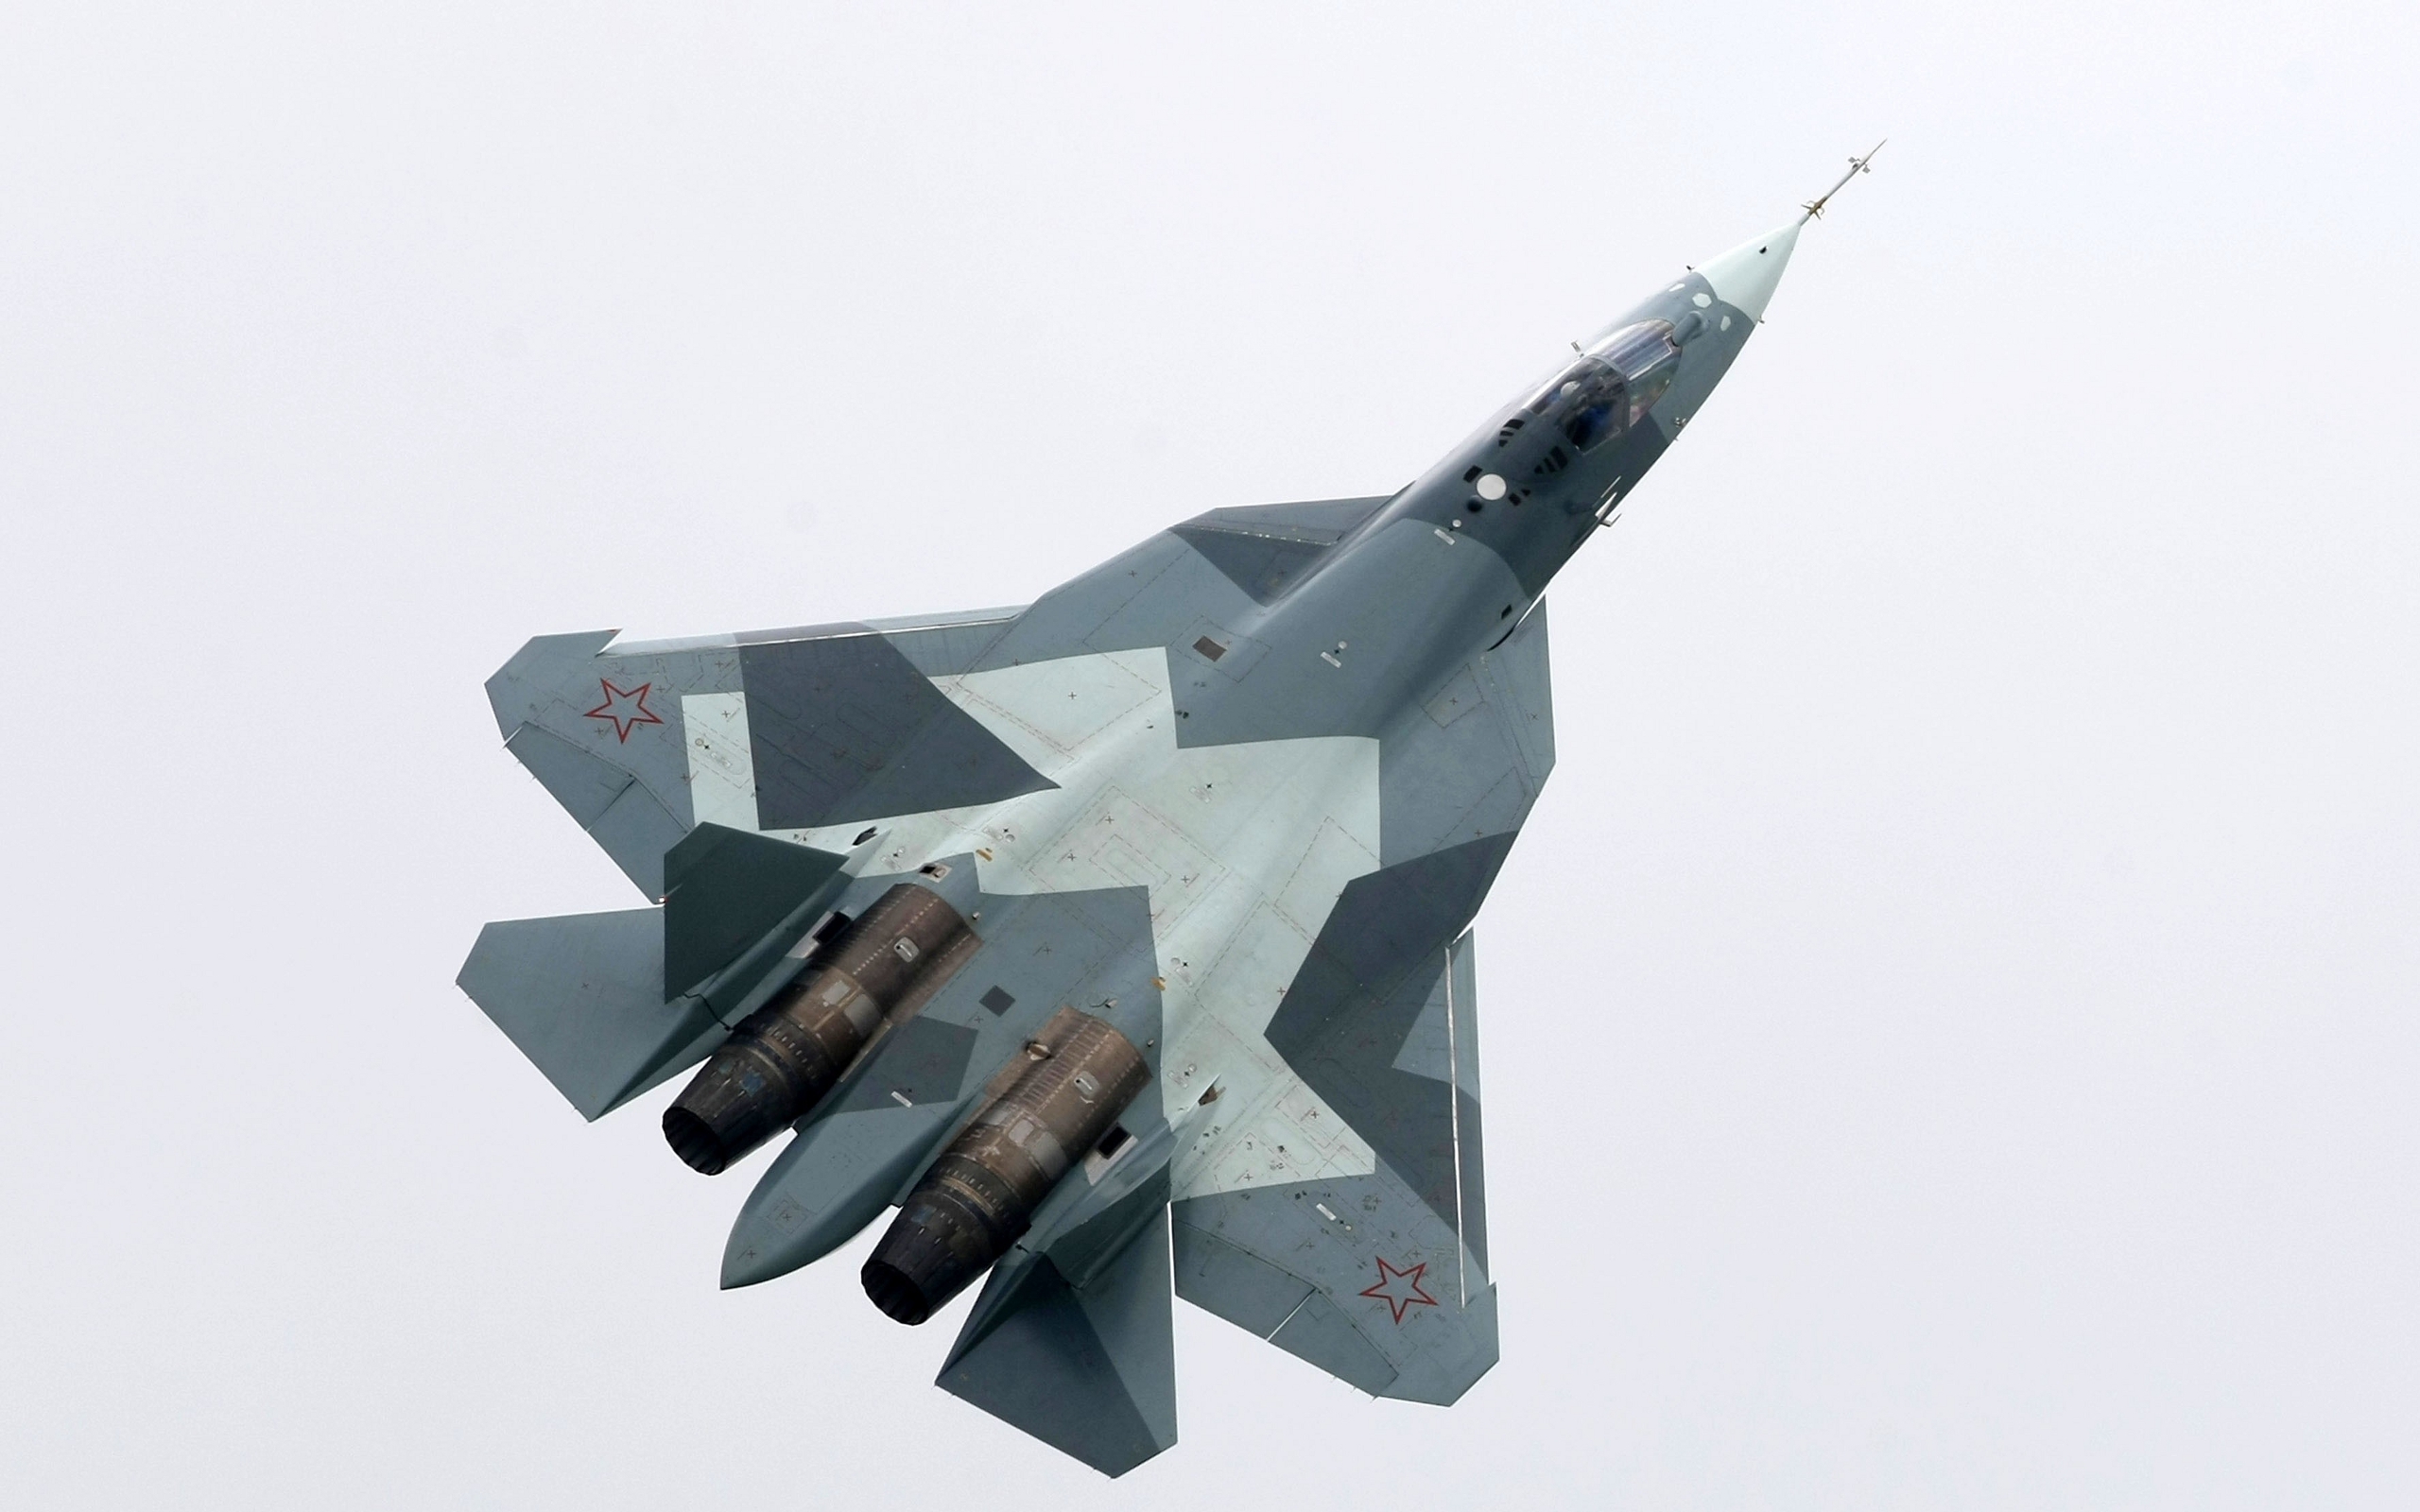 sukhoi su 57, military, jet fighters